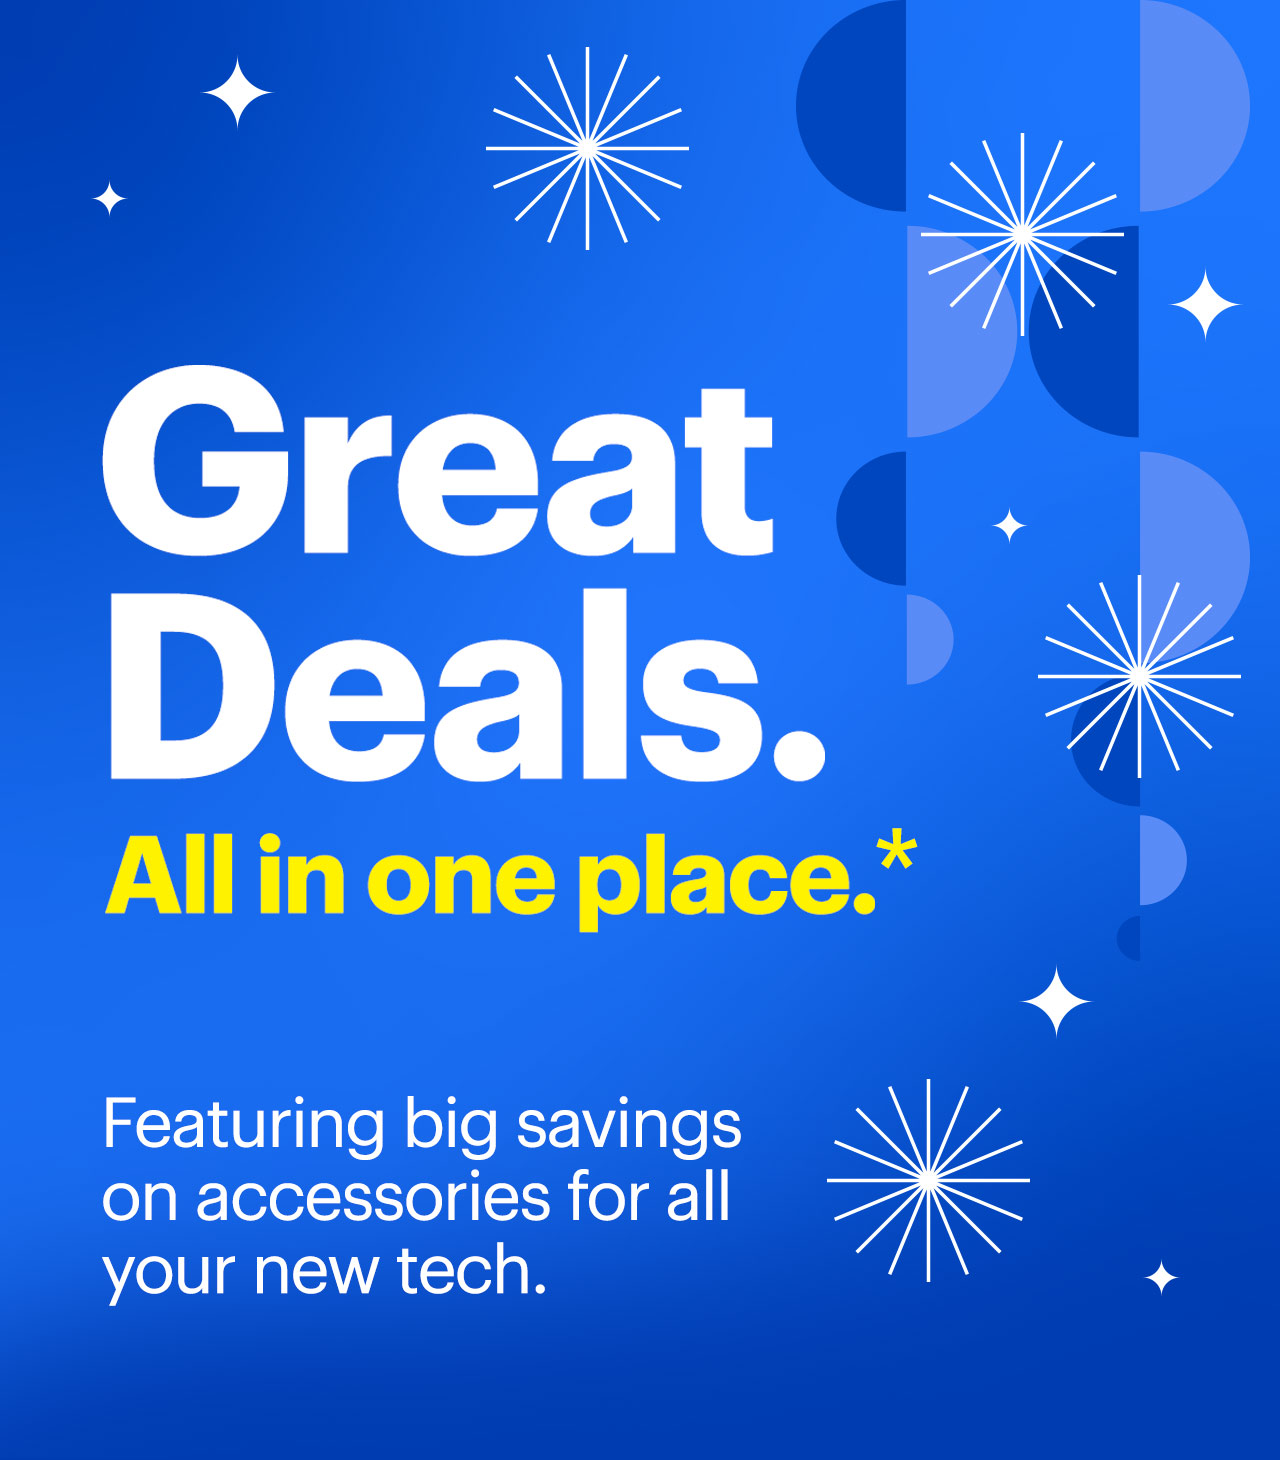 Great deals. All in one place. Featuring big savings on accessories for all your new tech. Reference disclaimer.